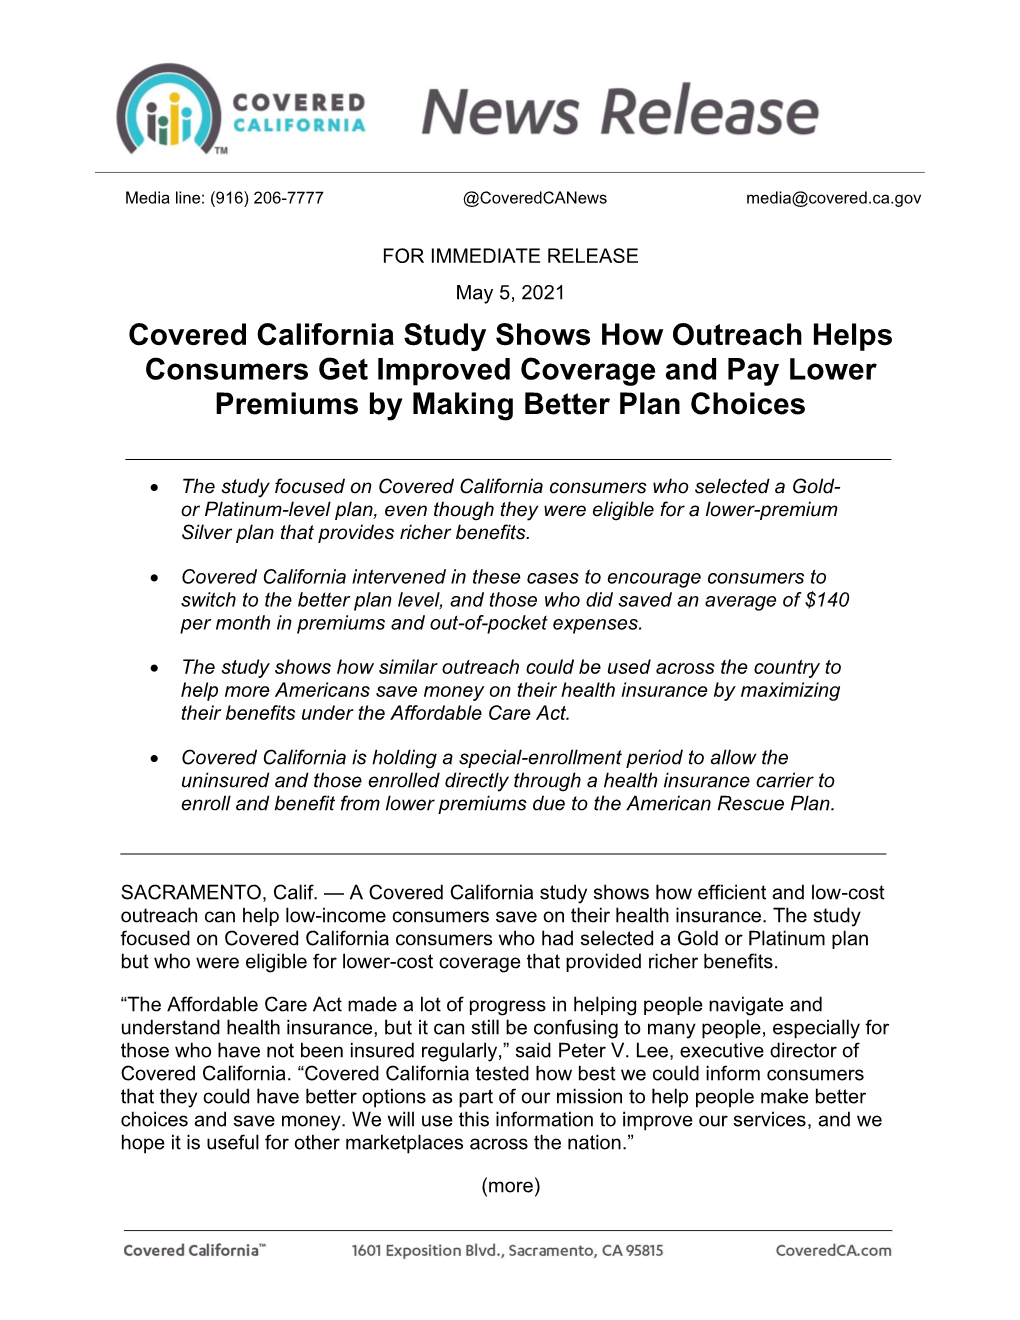 Covered California Study Shows How Outreach Helps Consumers Get Improved Coverage and Pay Lower Premiums by Making Better Plan Choices